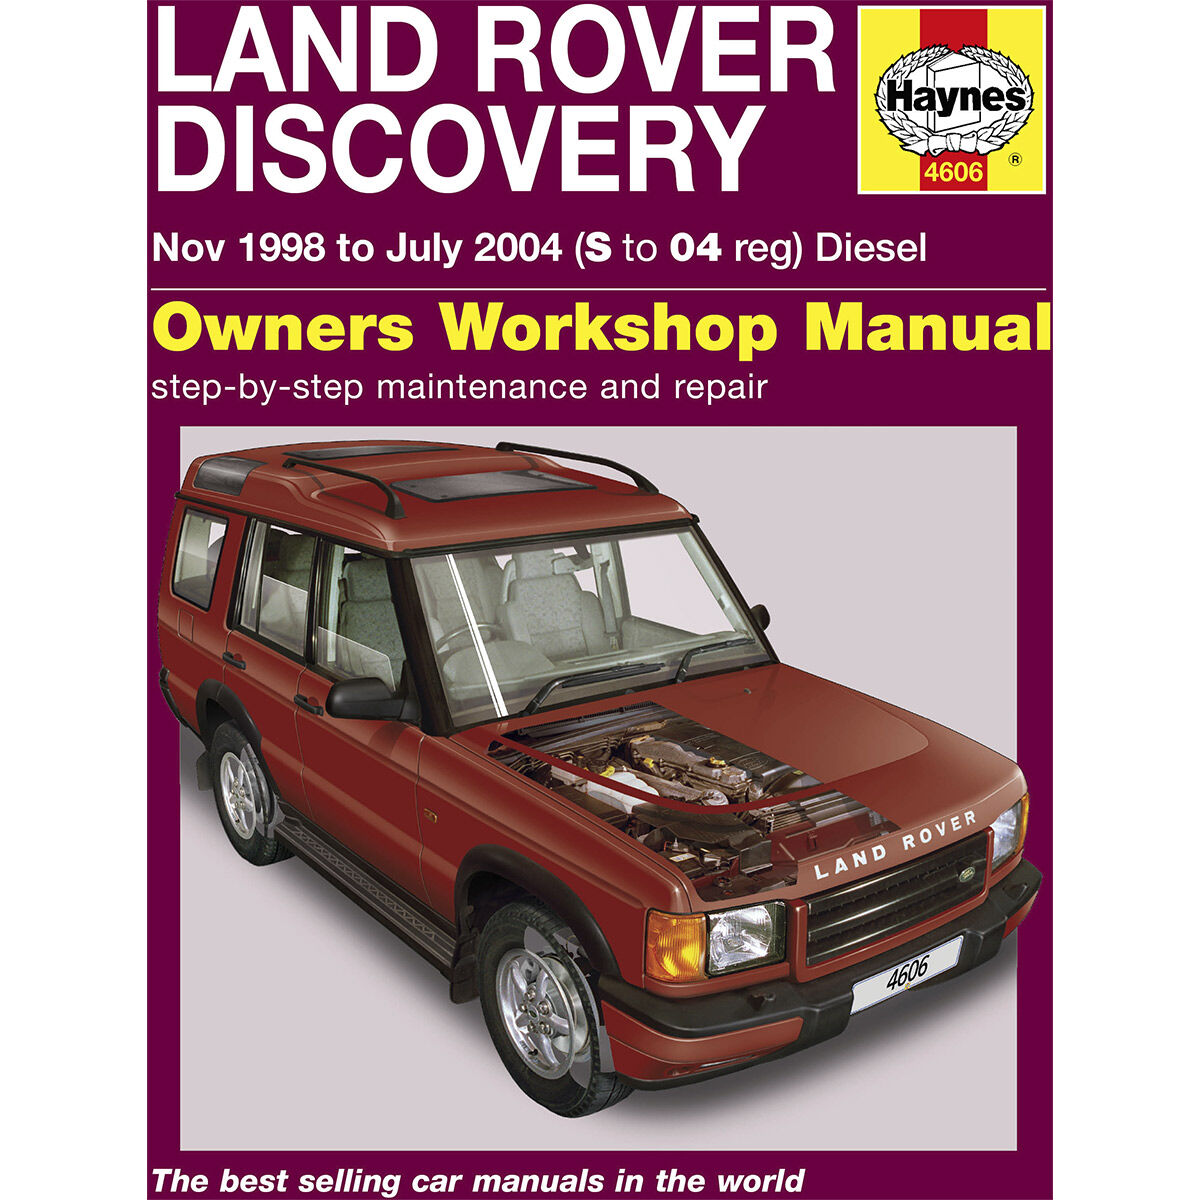 2004 land rover discovery owners manual pdf